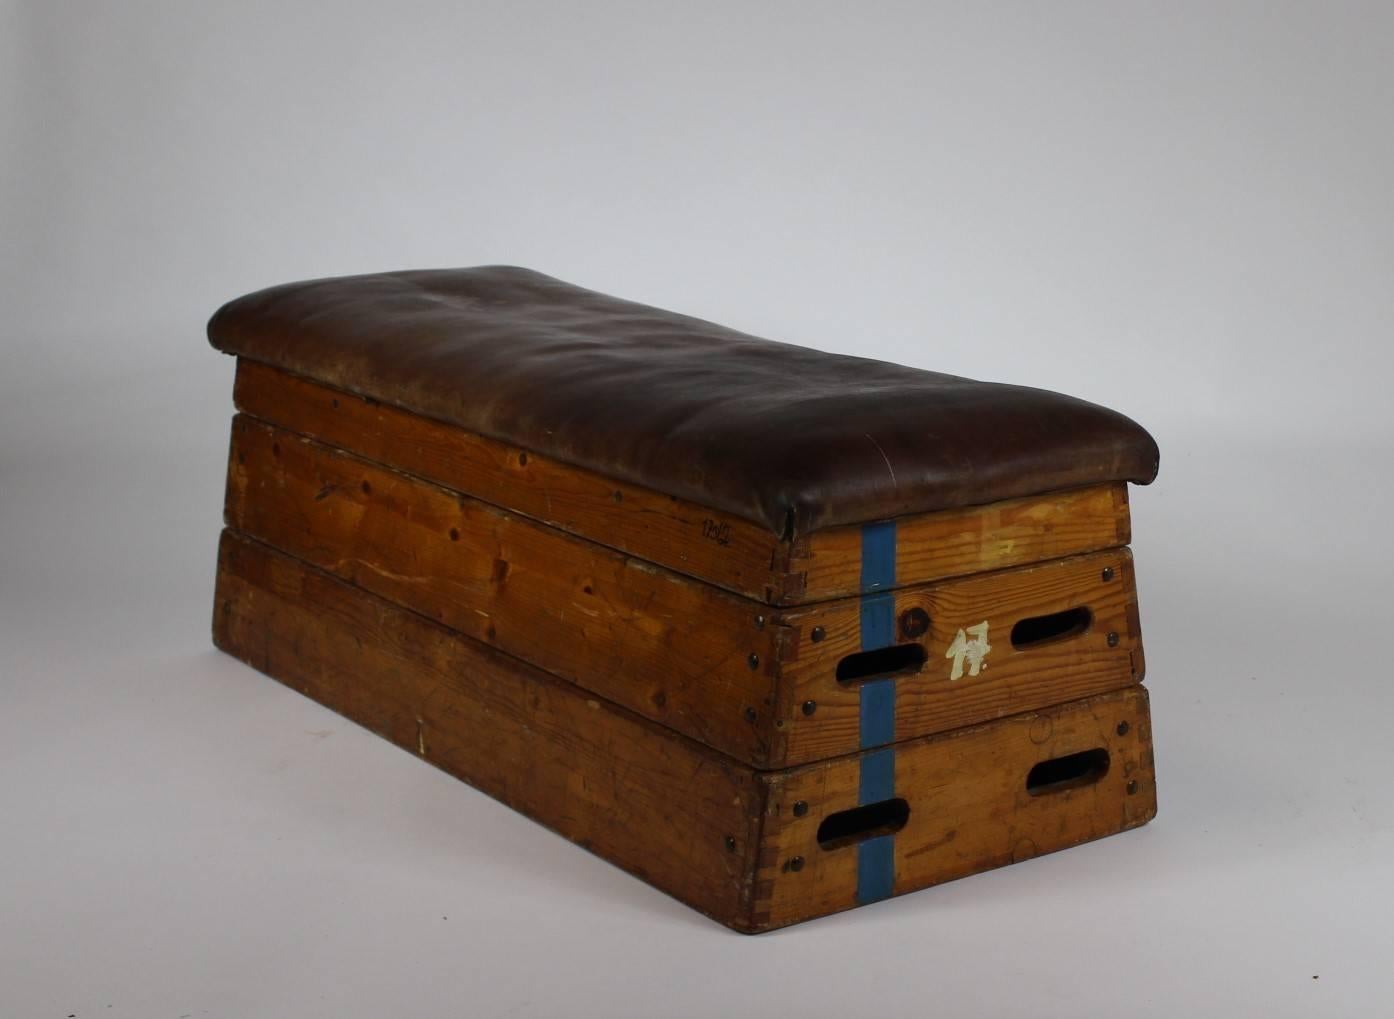 Gymnastic box or bench made in the 1950s. It is made from wood and leather. Original condition with patina.